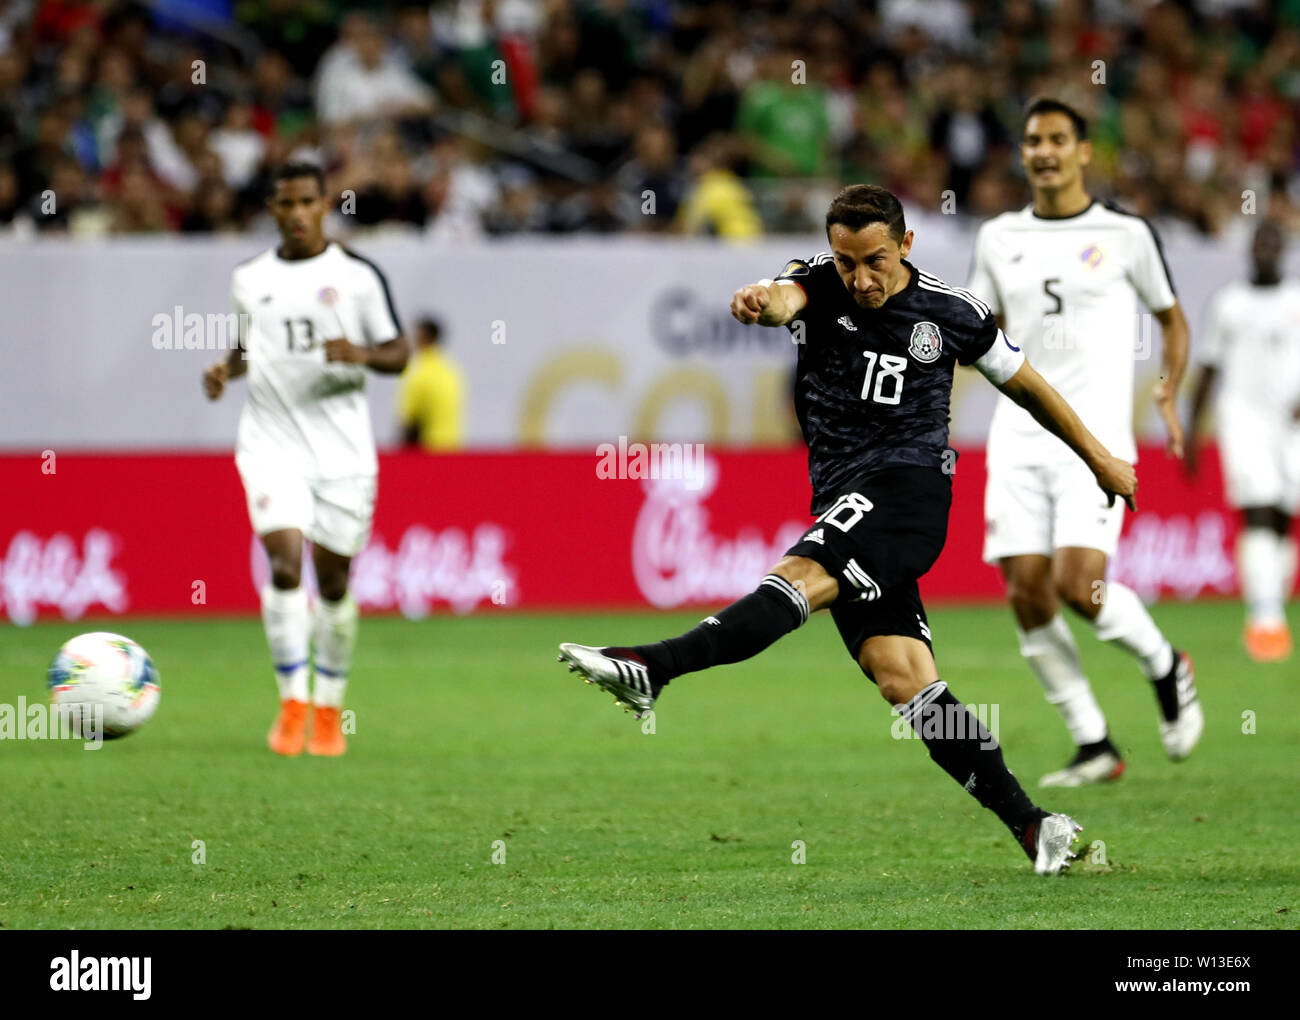 (190630) -- HOUSTON, JUNE 30, 2019 (Xinhua) Mexico's Andres Guardado (Front) shoots during the CONCACAF Gold Cup soccer tournament quarterfinal between Mexico and Costa Rica at NRG Stadium in Houston, Texas, the United States on June 29, 2019.  The match ended 1-1 through extra time.  Mexico beat Costa Rica 5-4 in a penalty shootout. (Xinhua/Song Qiong) Stock Photo